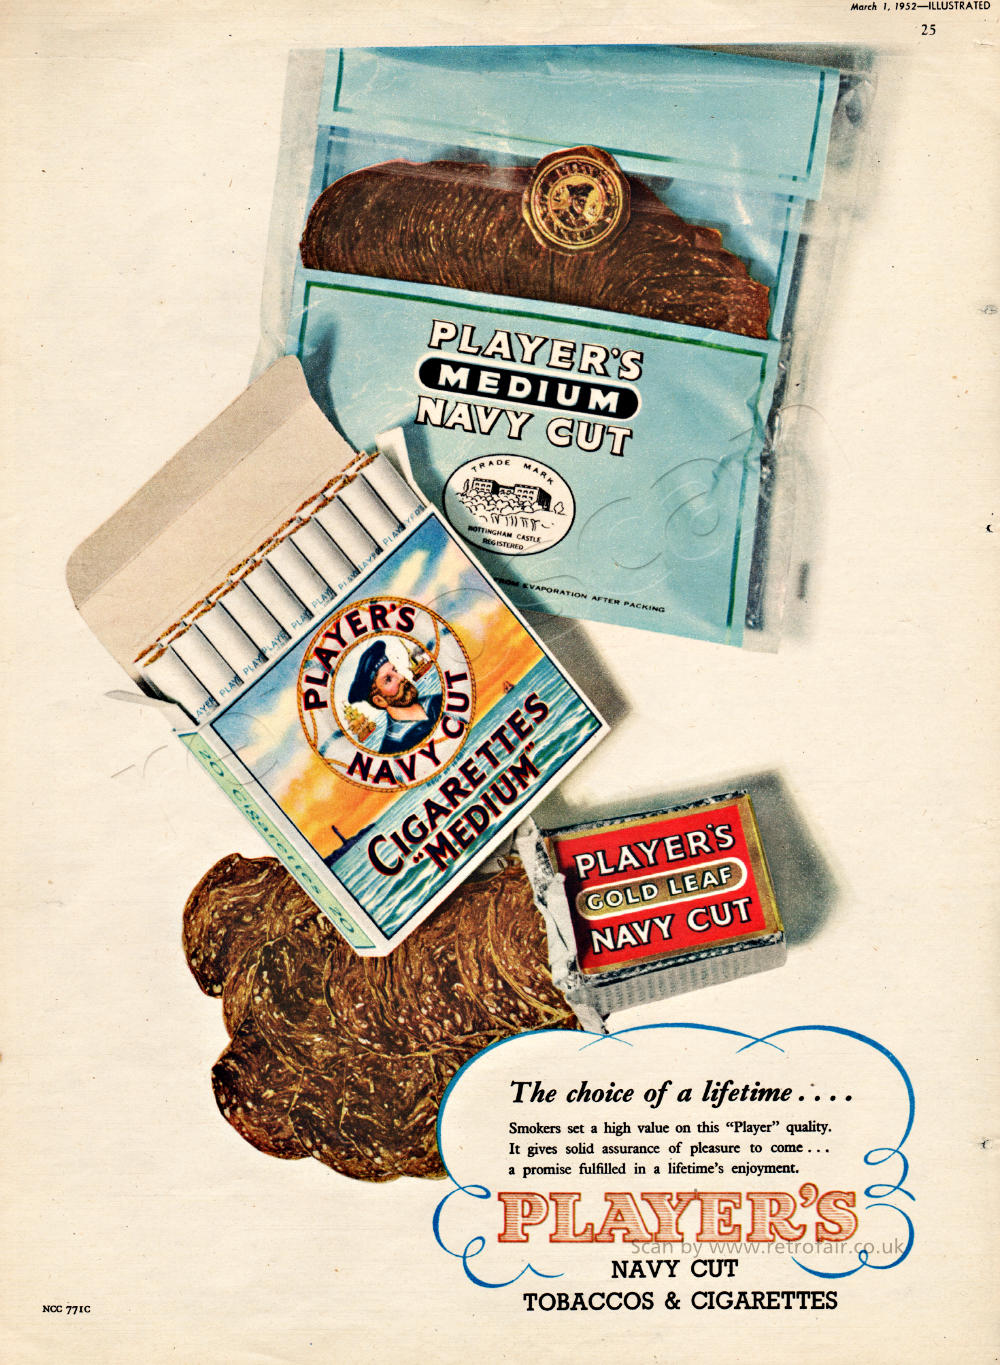 1952 Players Navy Cut Cigarettes & Tobacco Vintage Ad